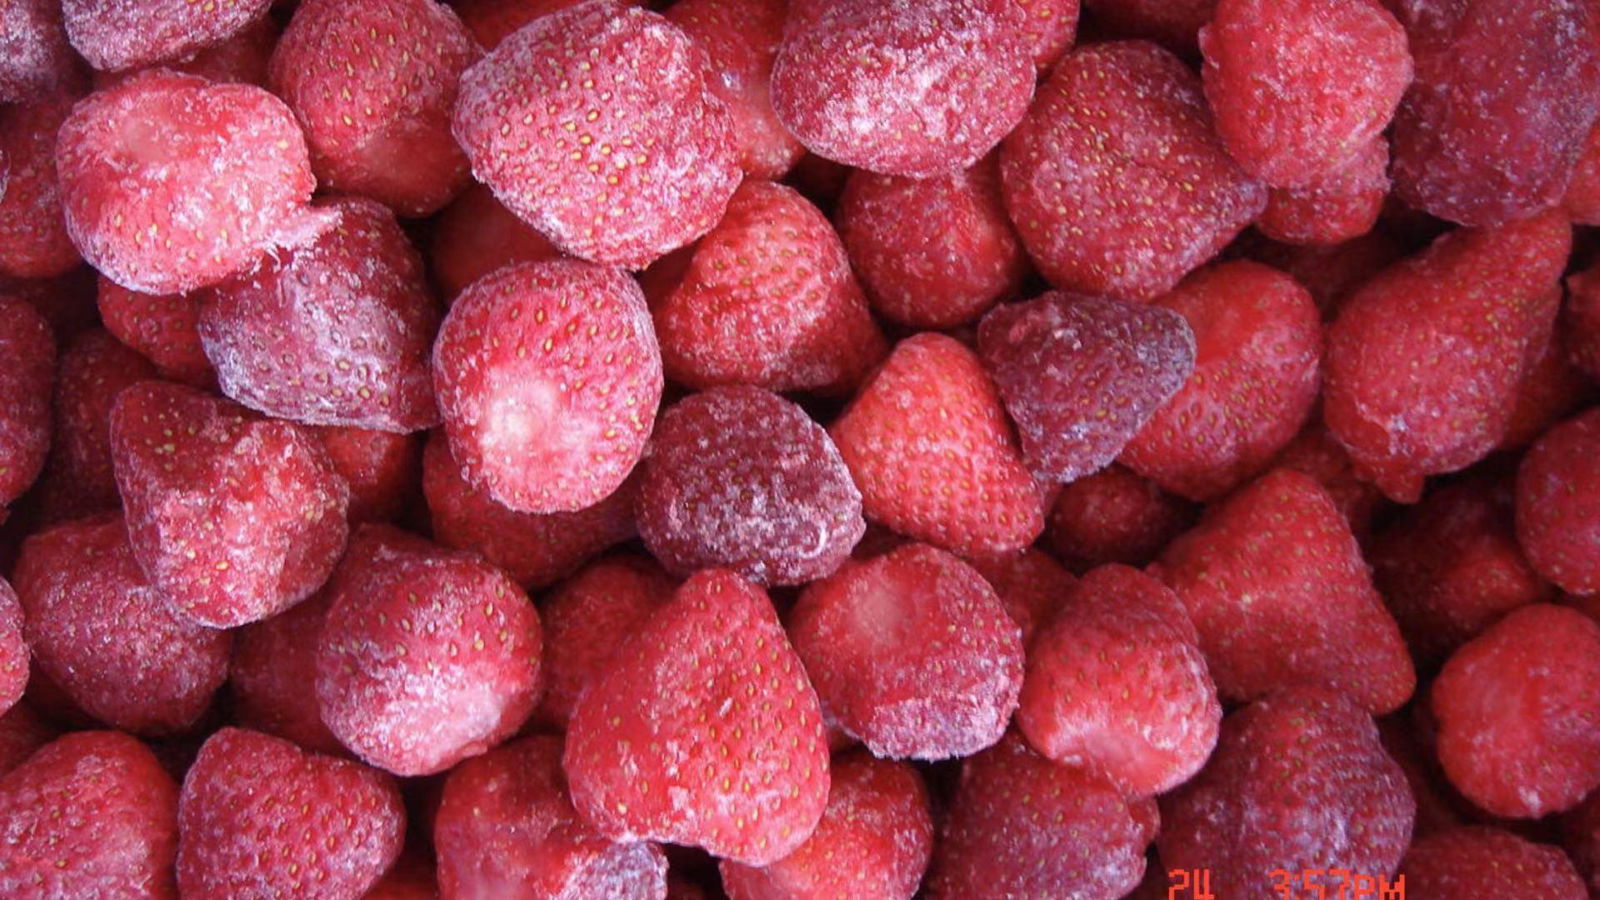 IQF Strawberries,Frozen Whole Strawberries,IQF Strawberry,American no.13 variety 3